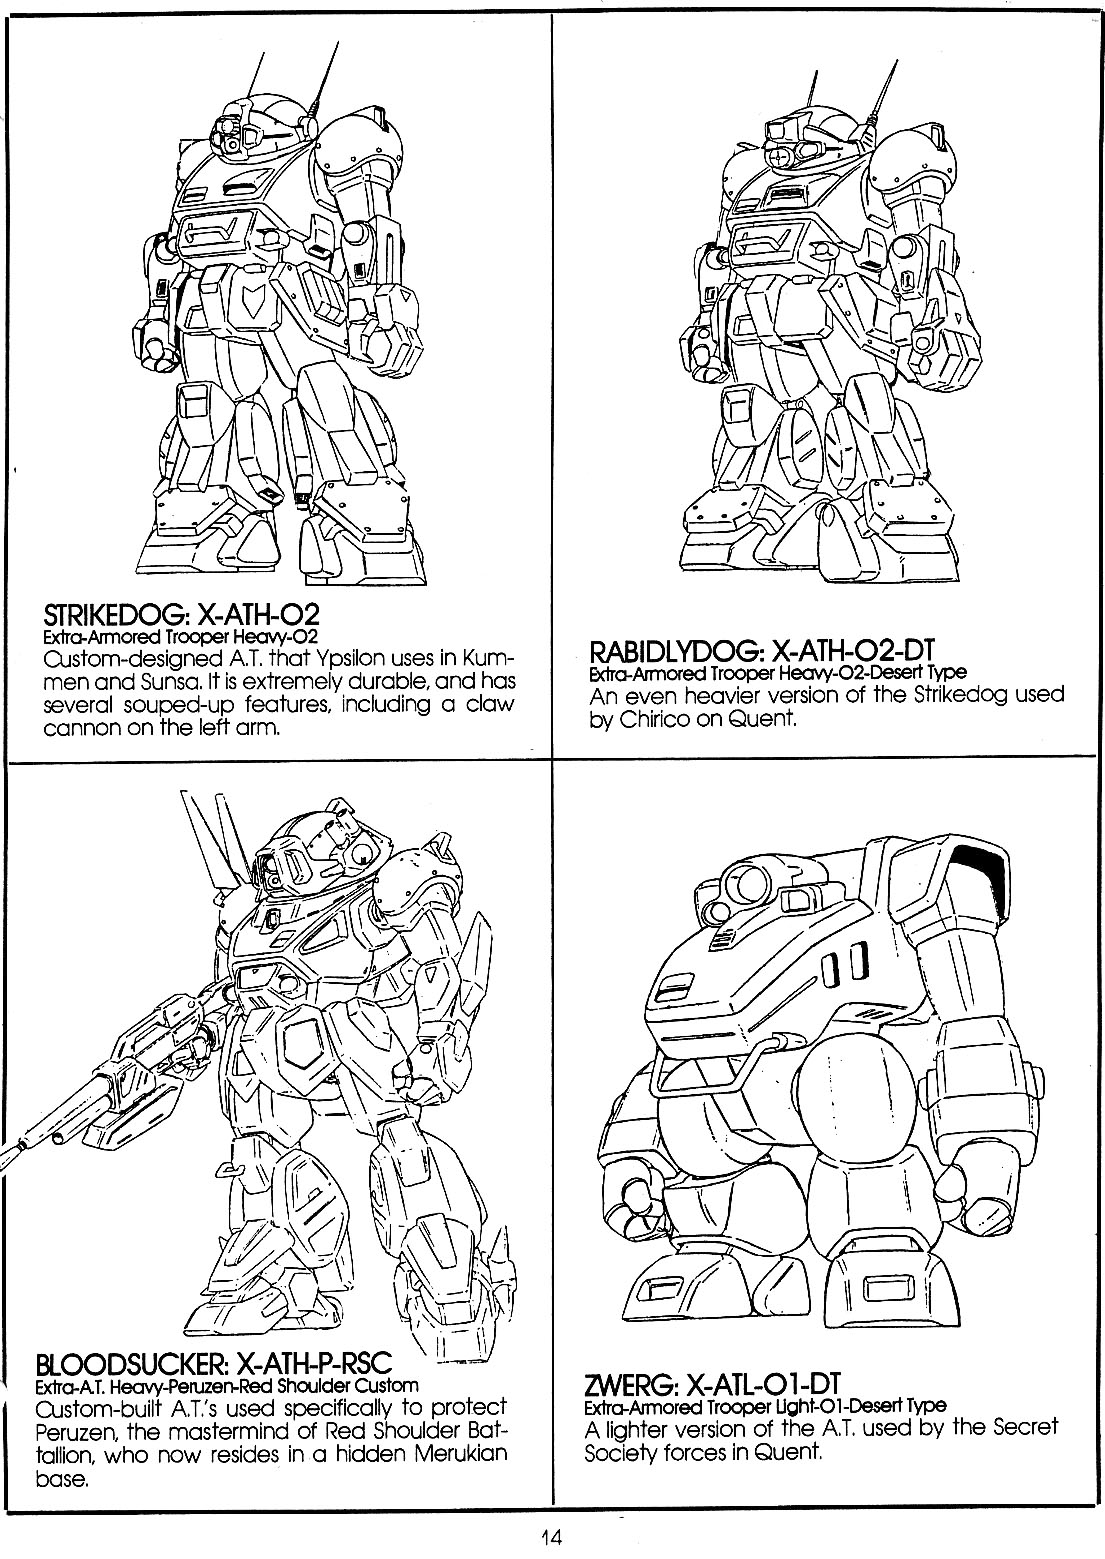 VOTOMS Viewing Guide 15